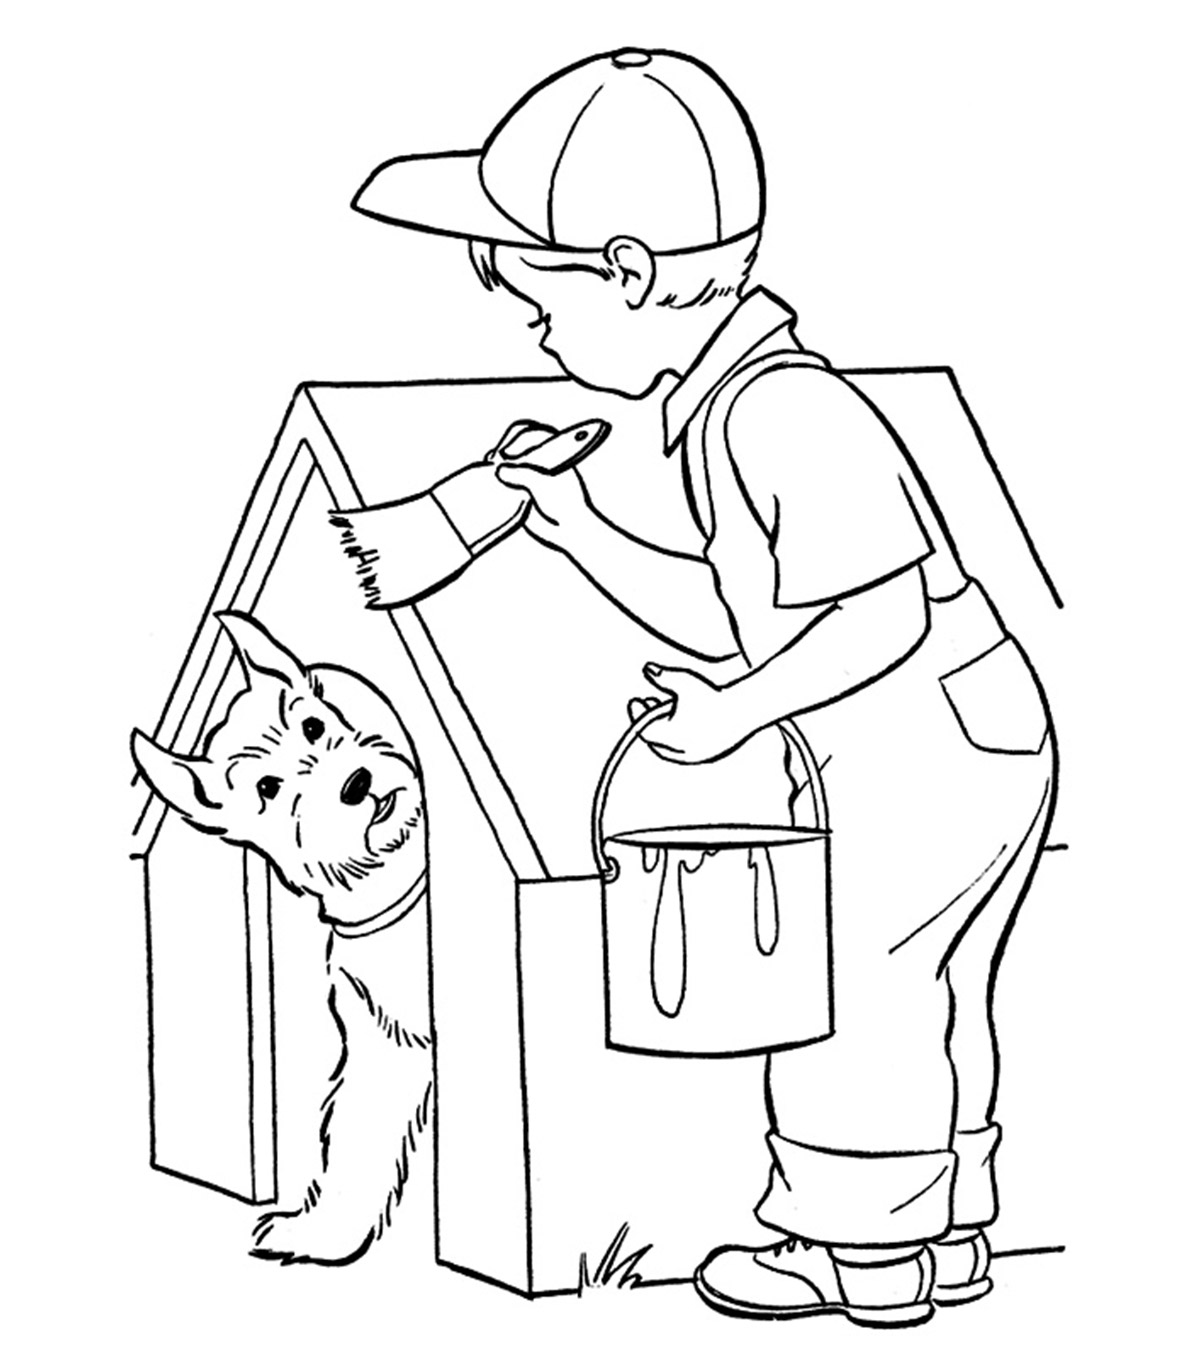 kids doing chores coloring pages